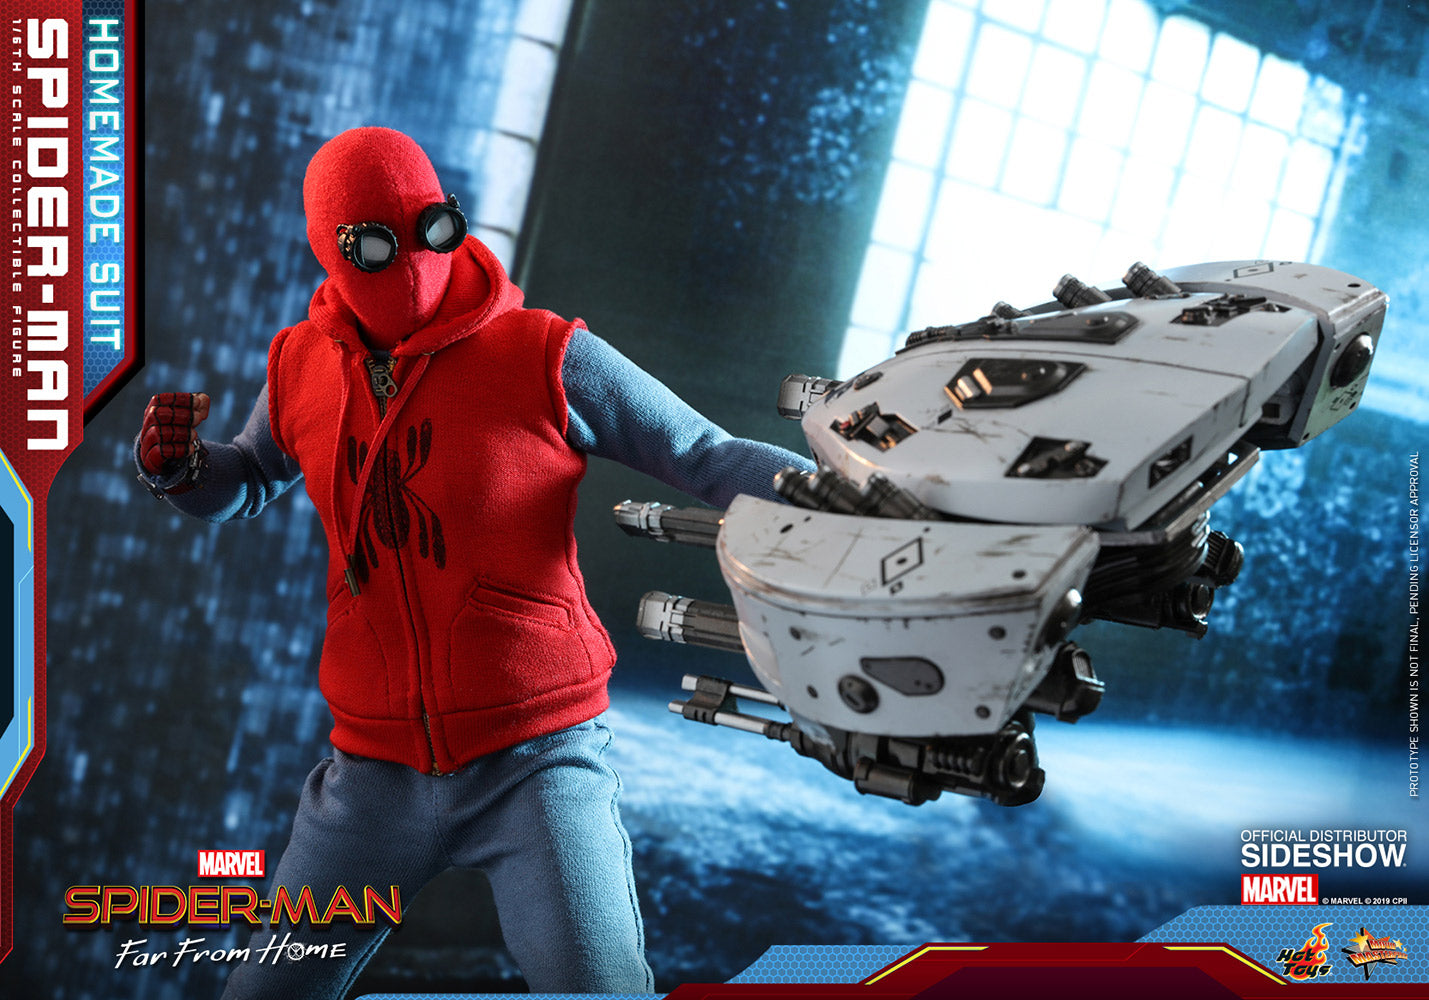 Spider-man Homemade Suit - Spider-man Far From Home - Sixth Scale Figure by Hot Toys